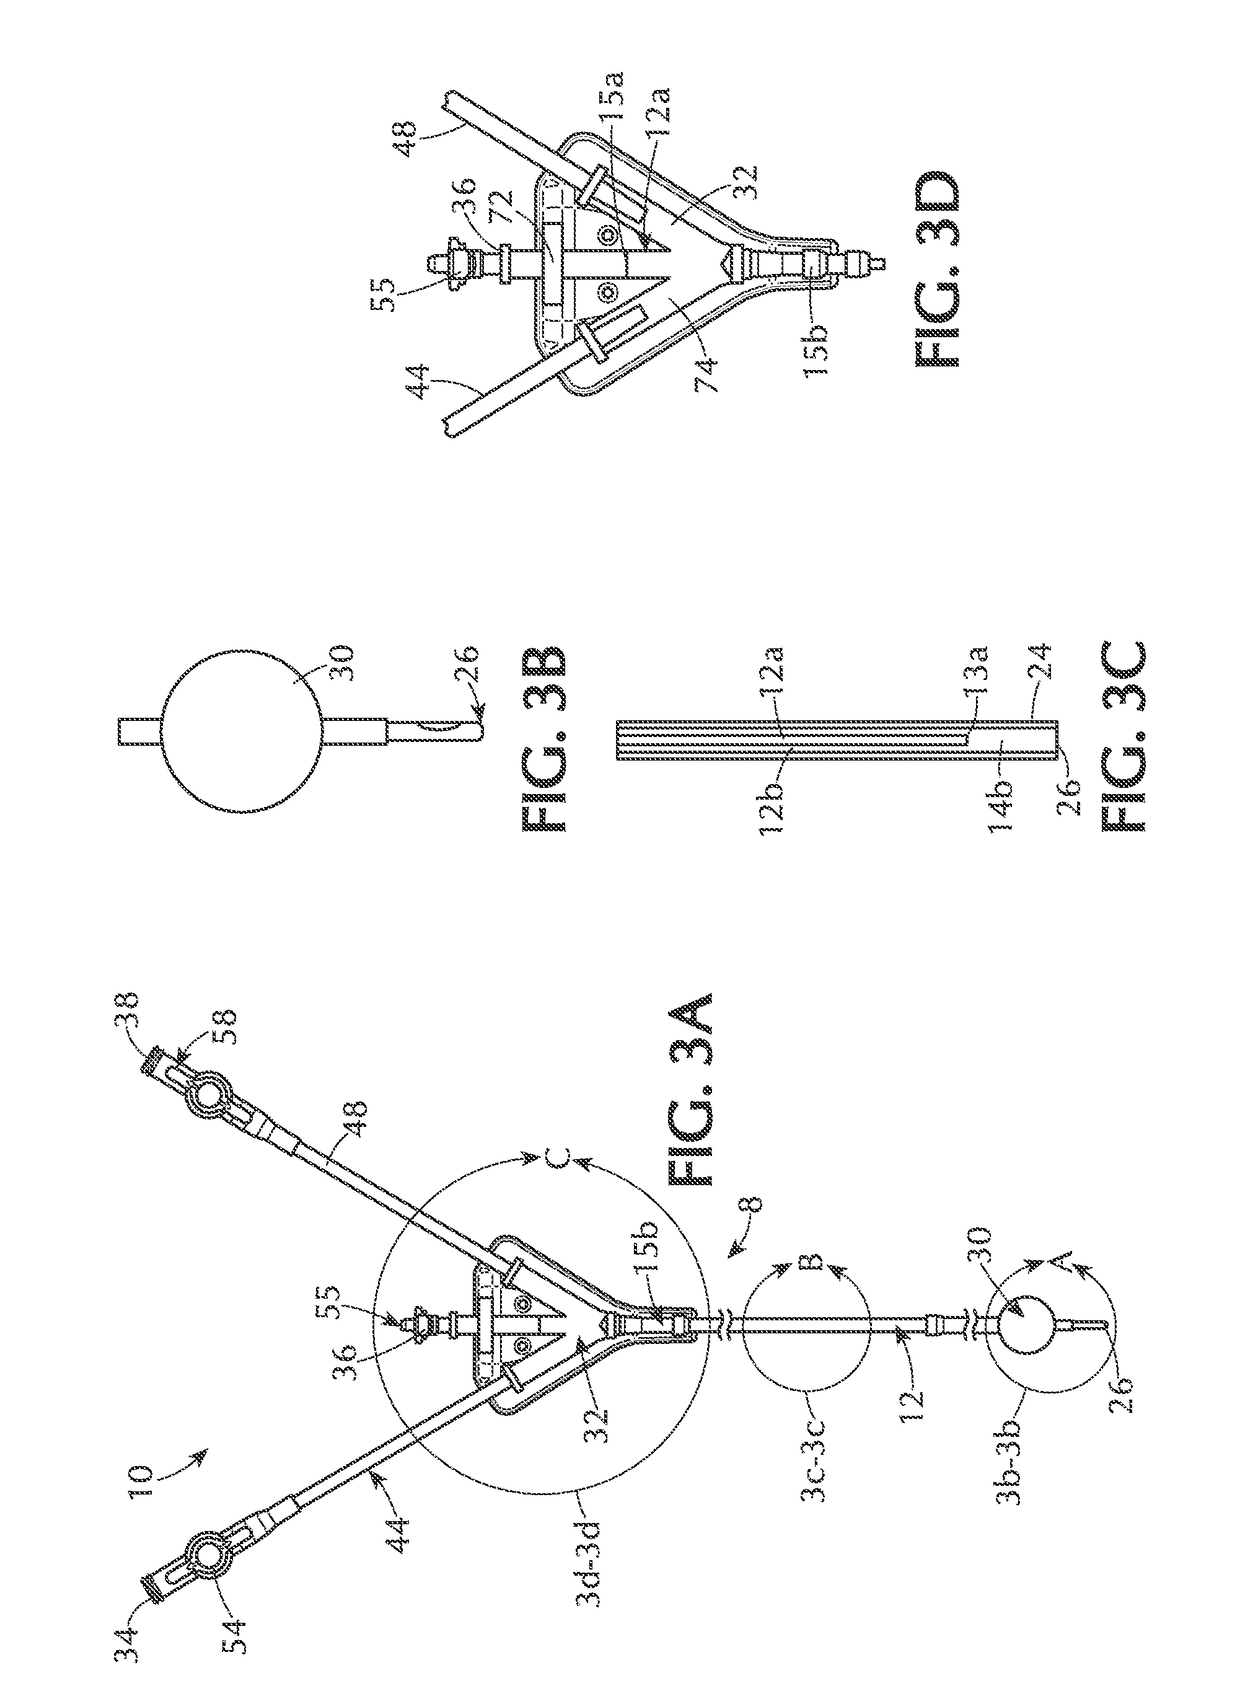 Method and apparatus of echogenic catheter systems